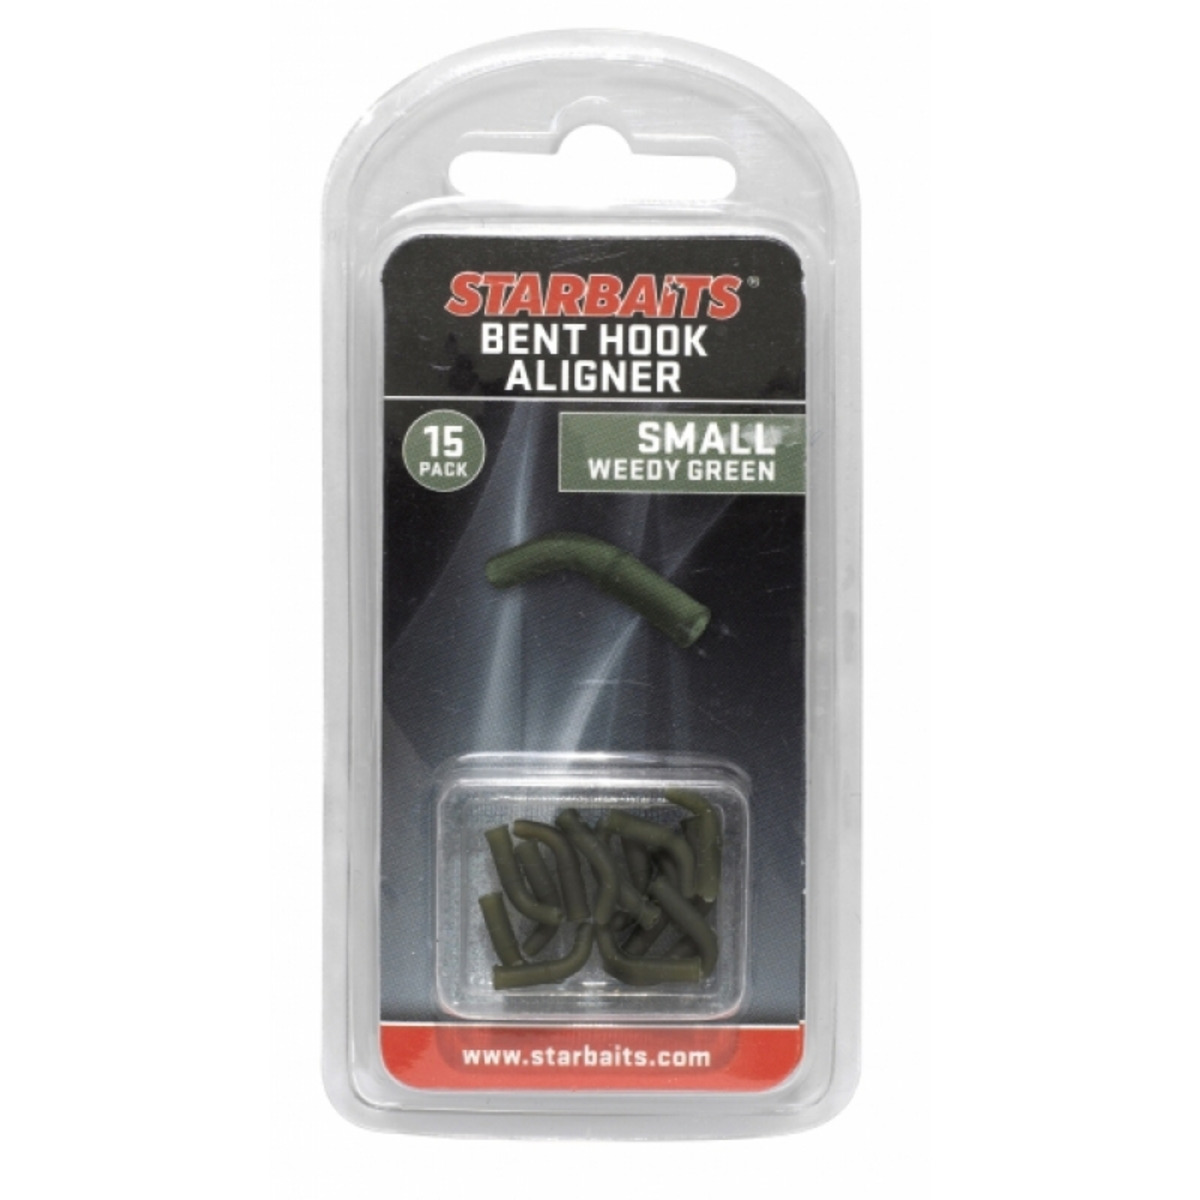 Starbaits Bent Hook Small - WEEDY GREEN